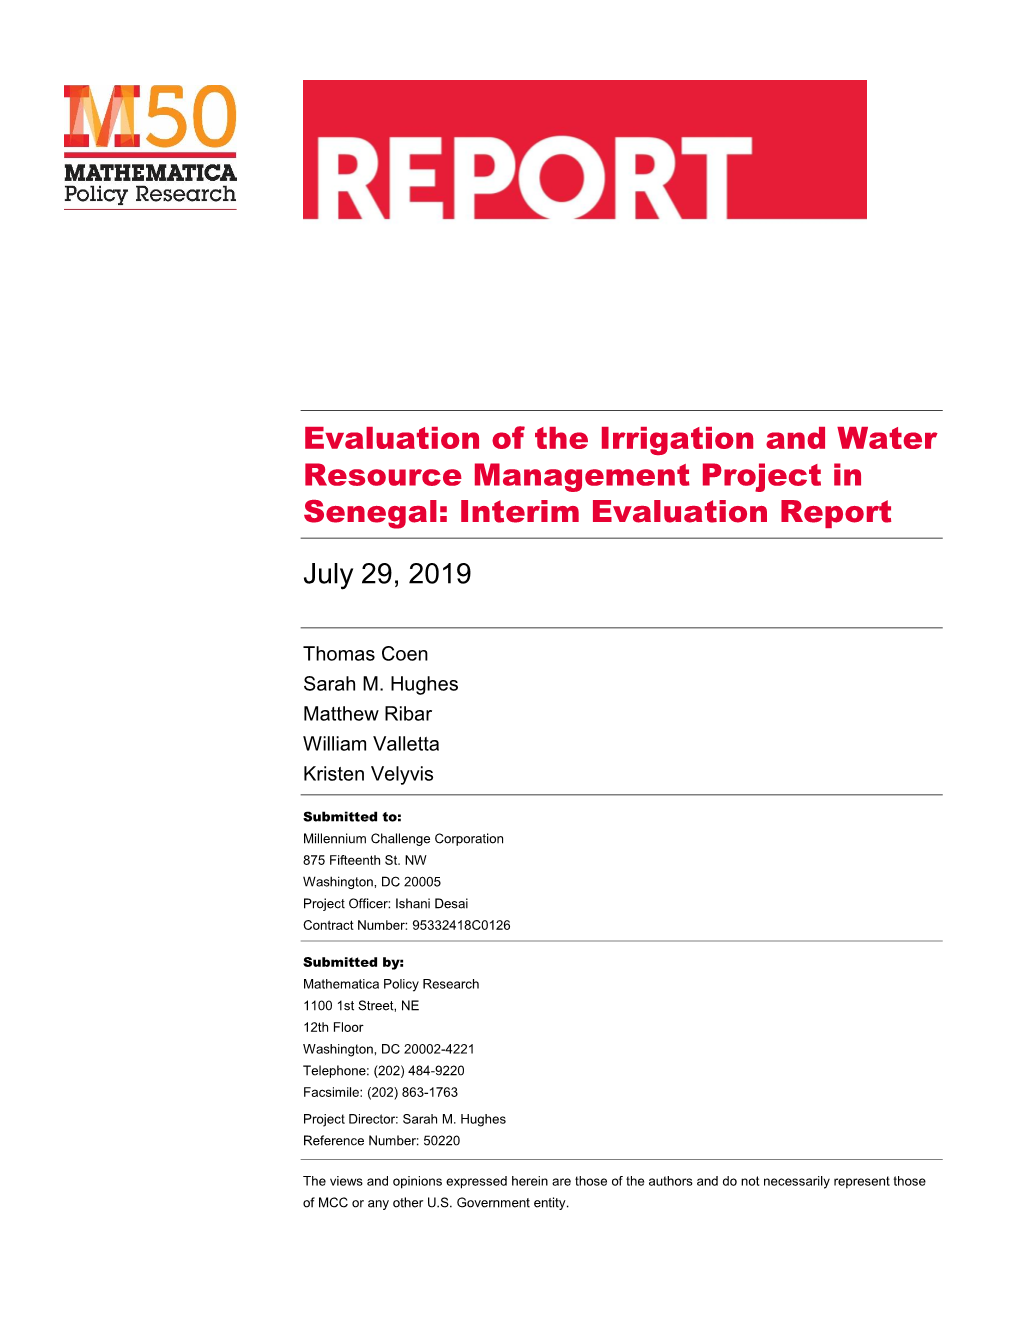 Evaluation of the Irrigation and Water Resource Management Project in Senegal: Interim Evaluation Report